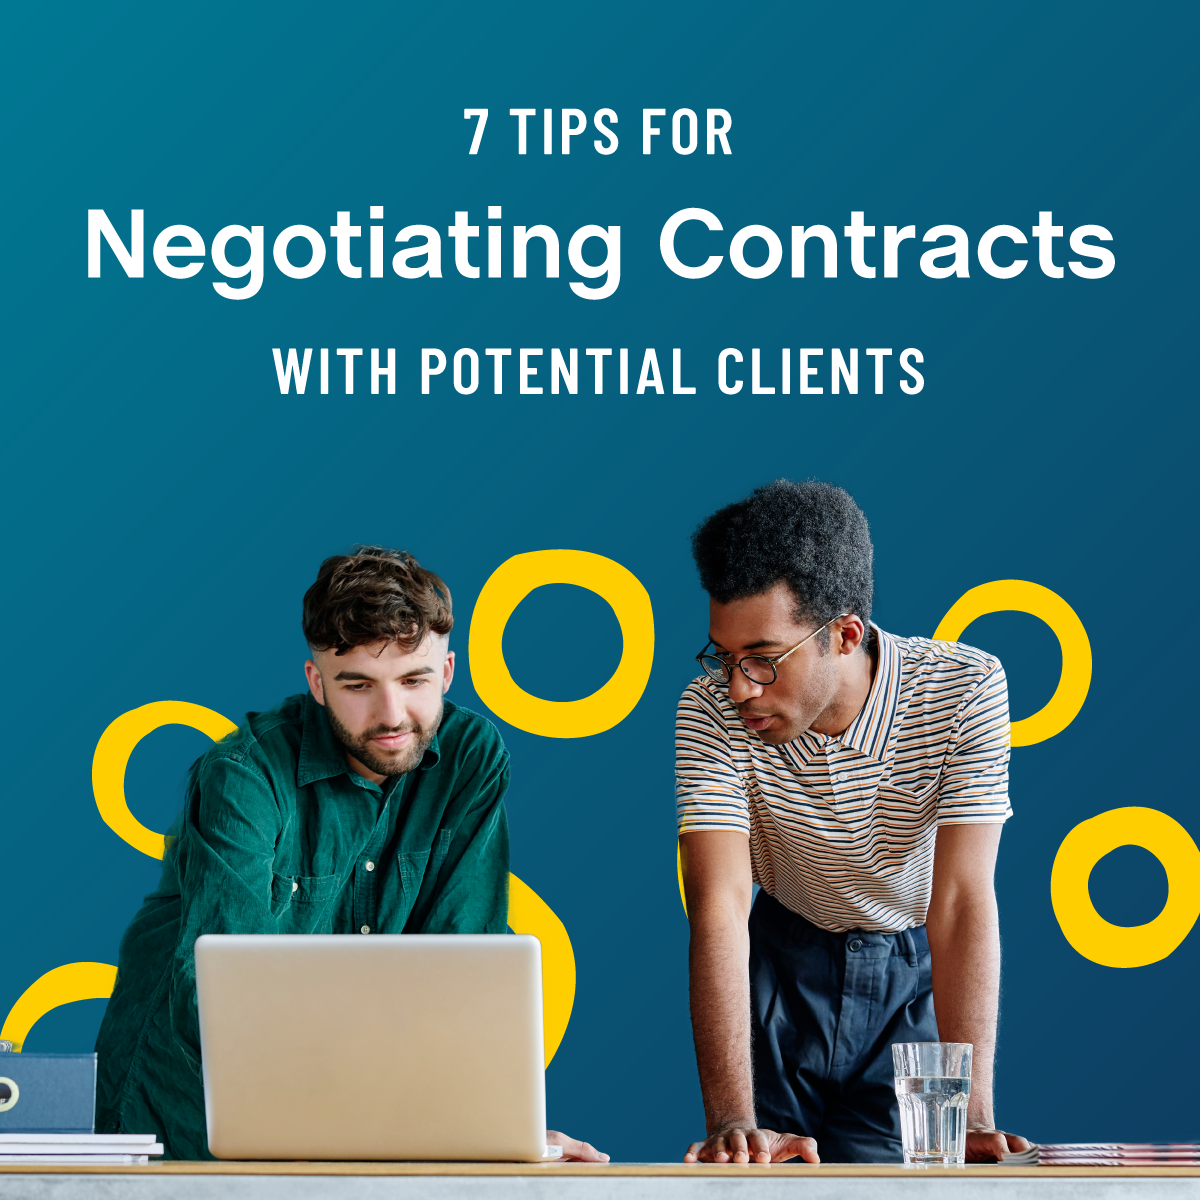 7 Tips For Negotiating Contracts With Potential Clients